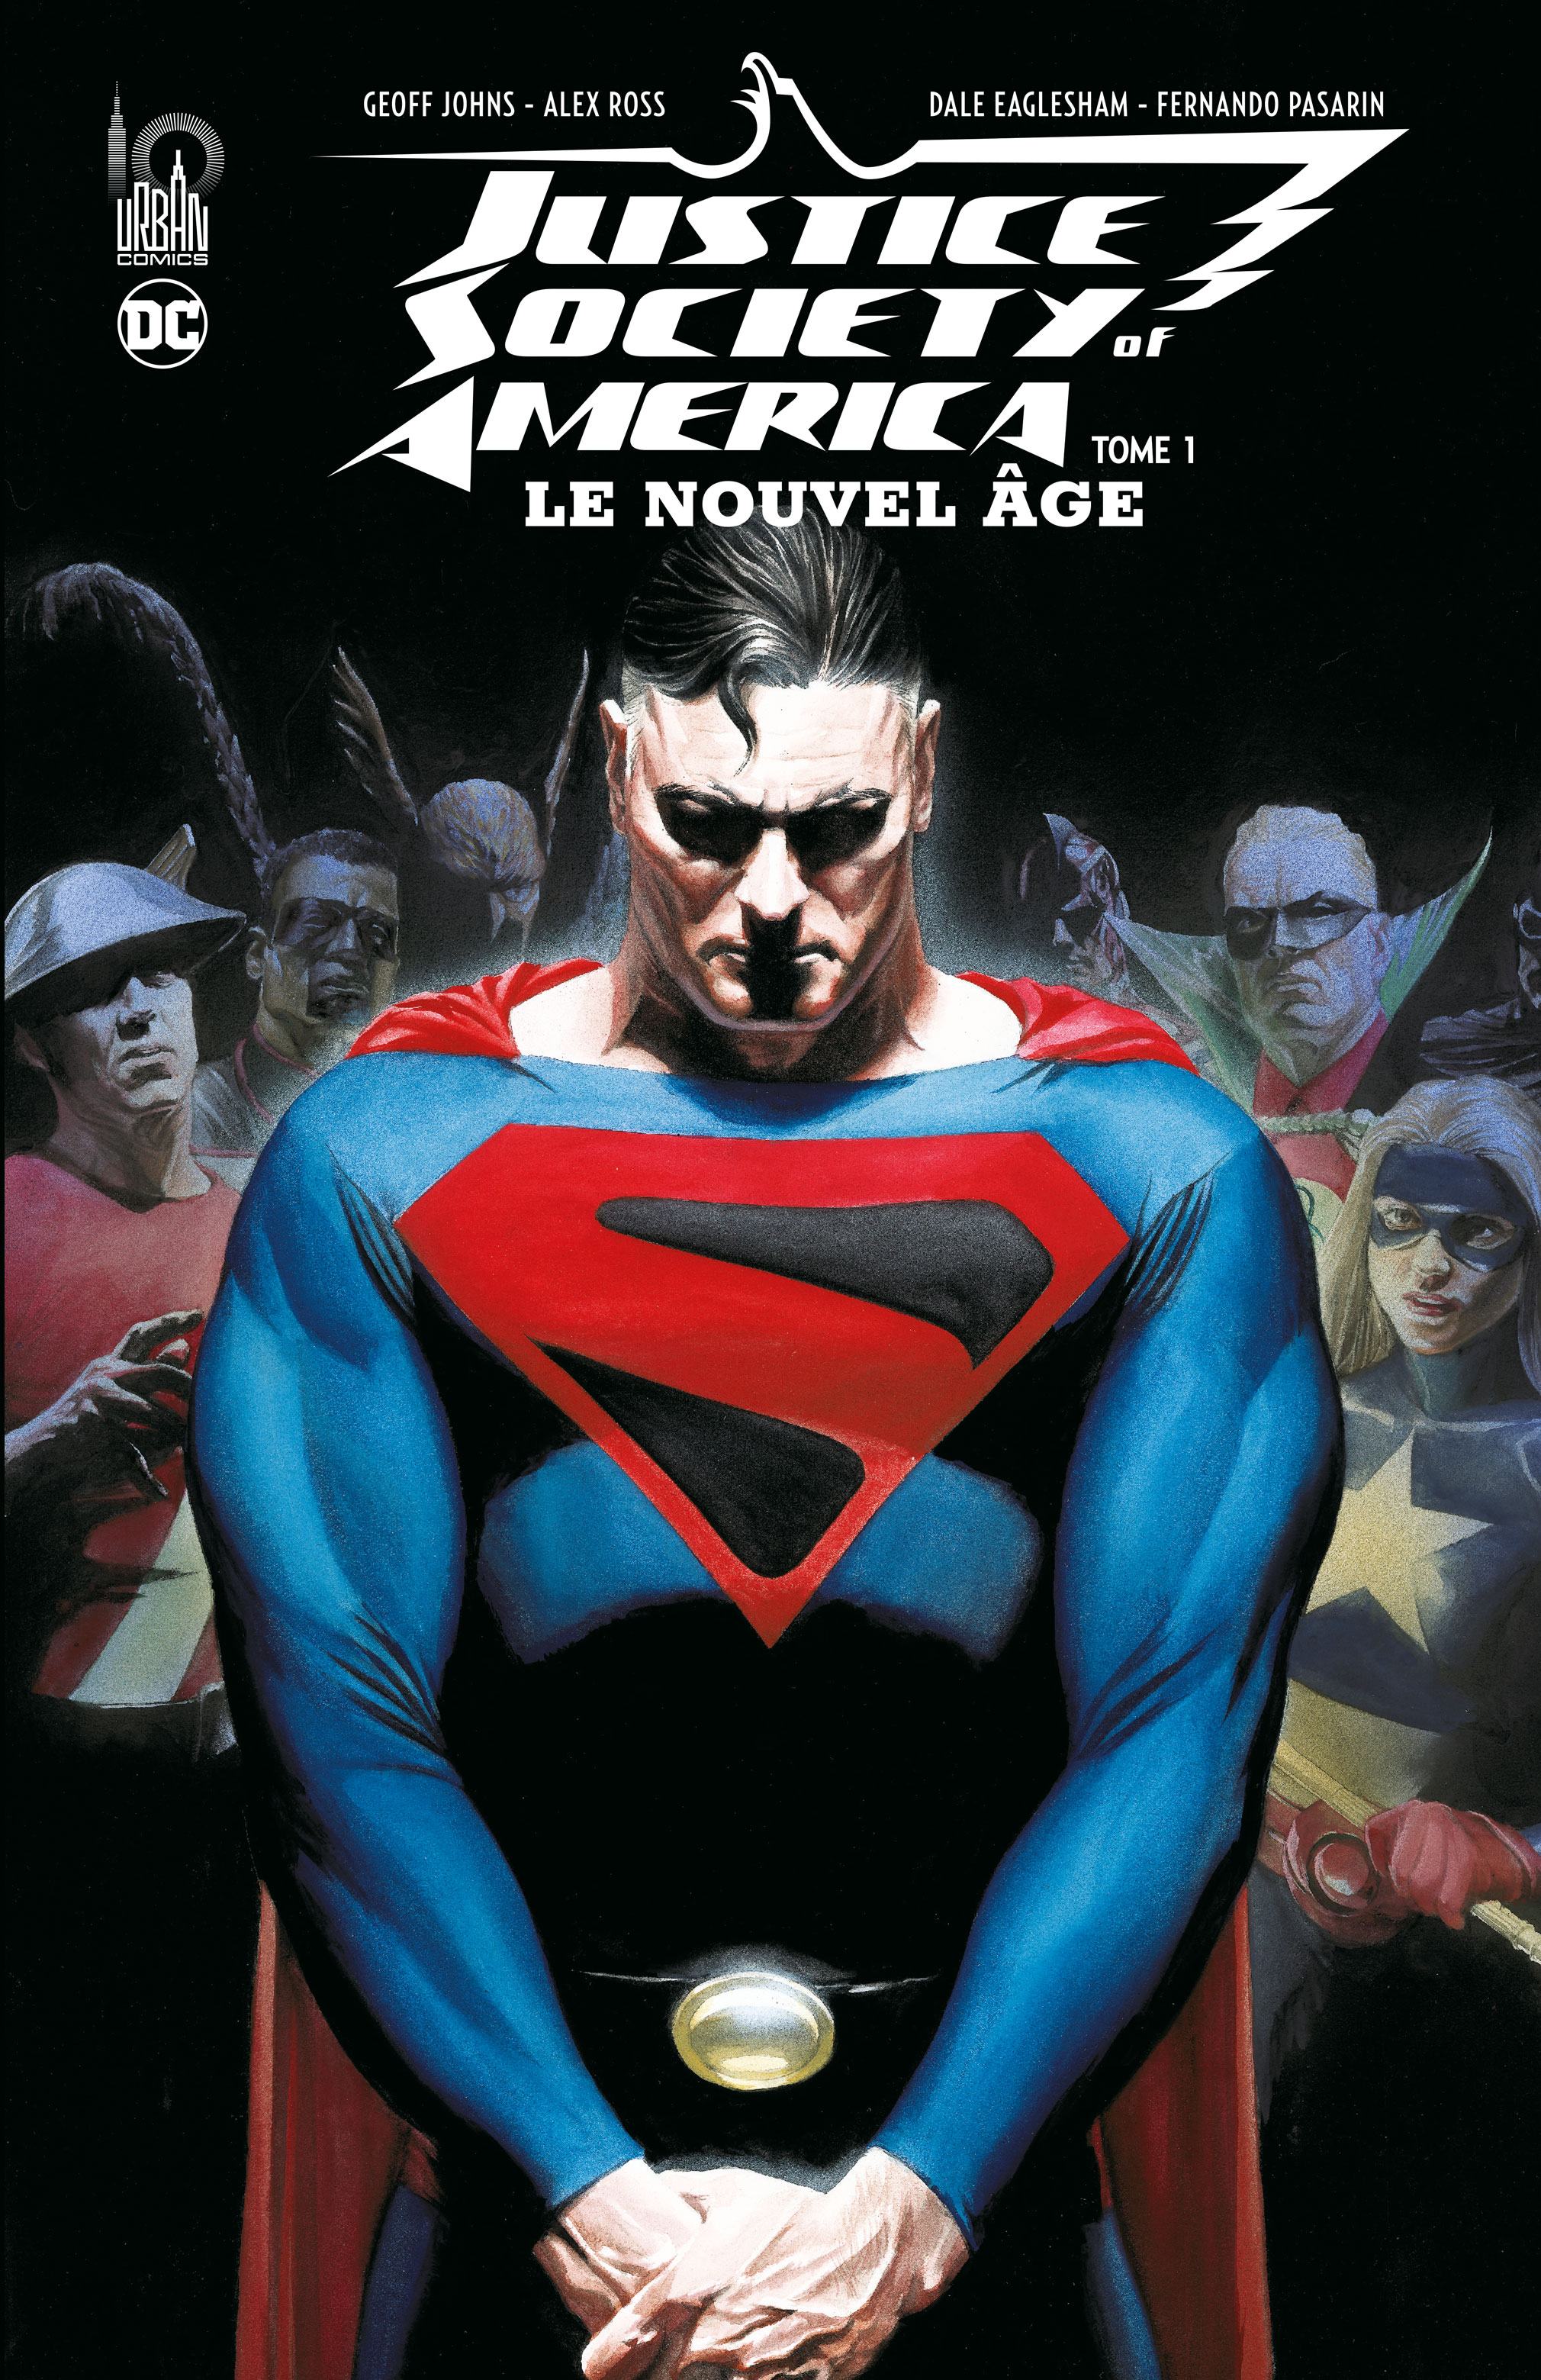 Justice Society of America Le Nouvel Âge – Tome 1 - couv